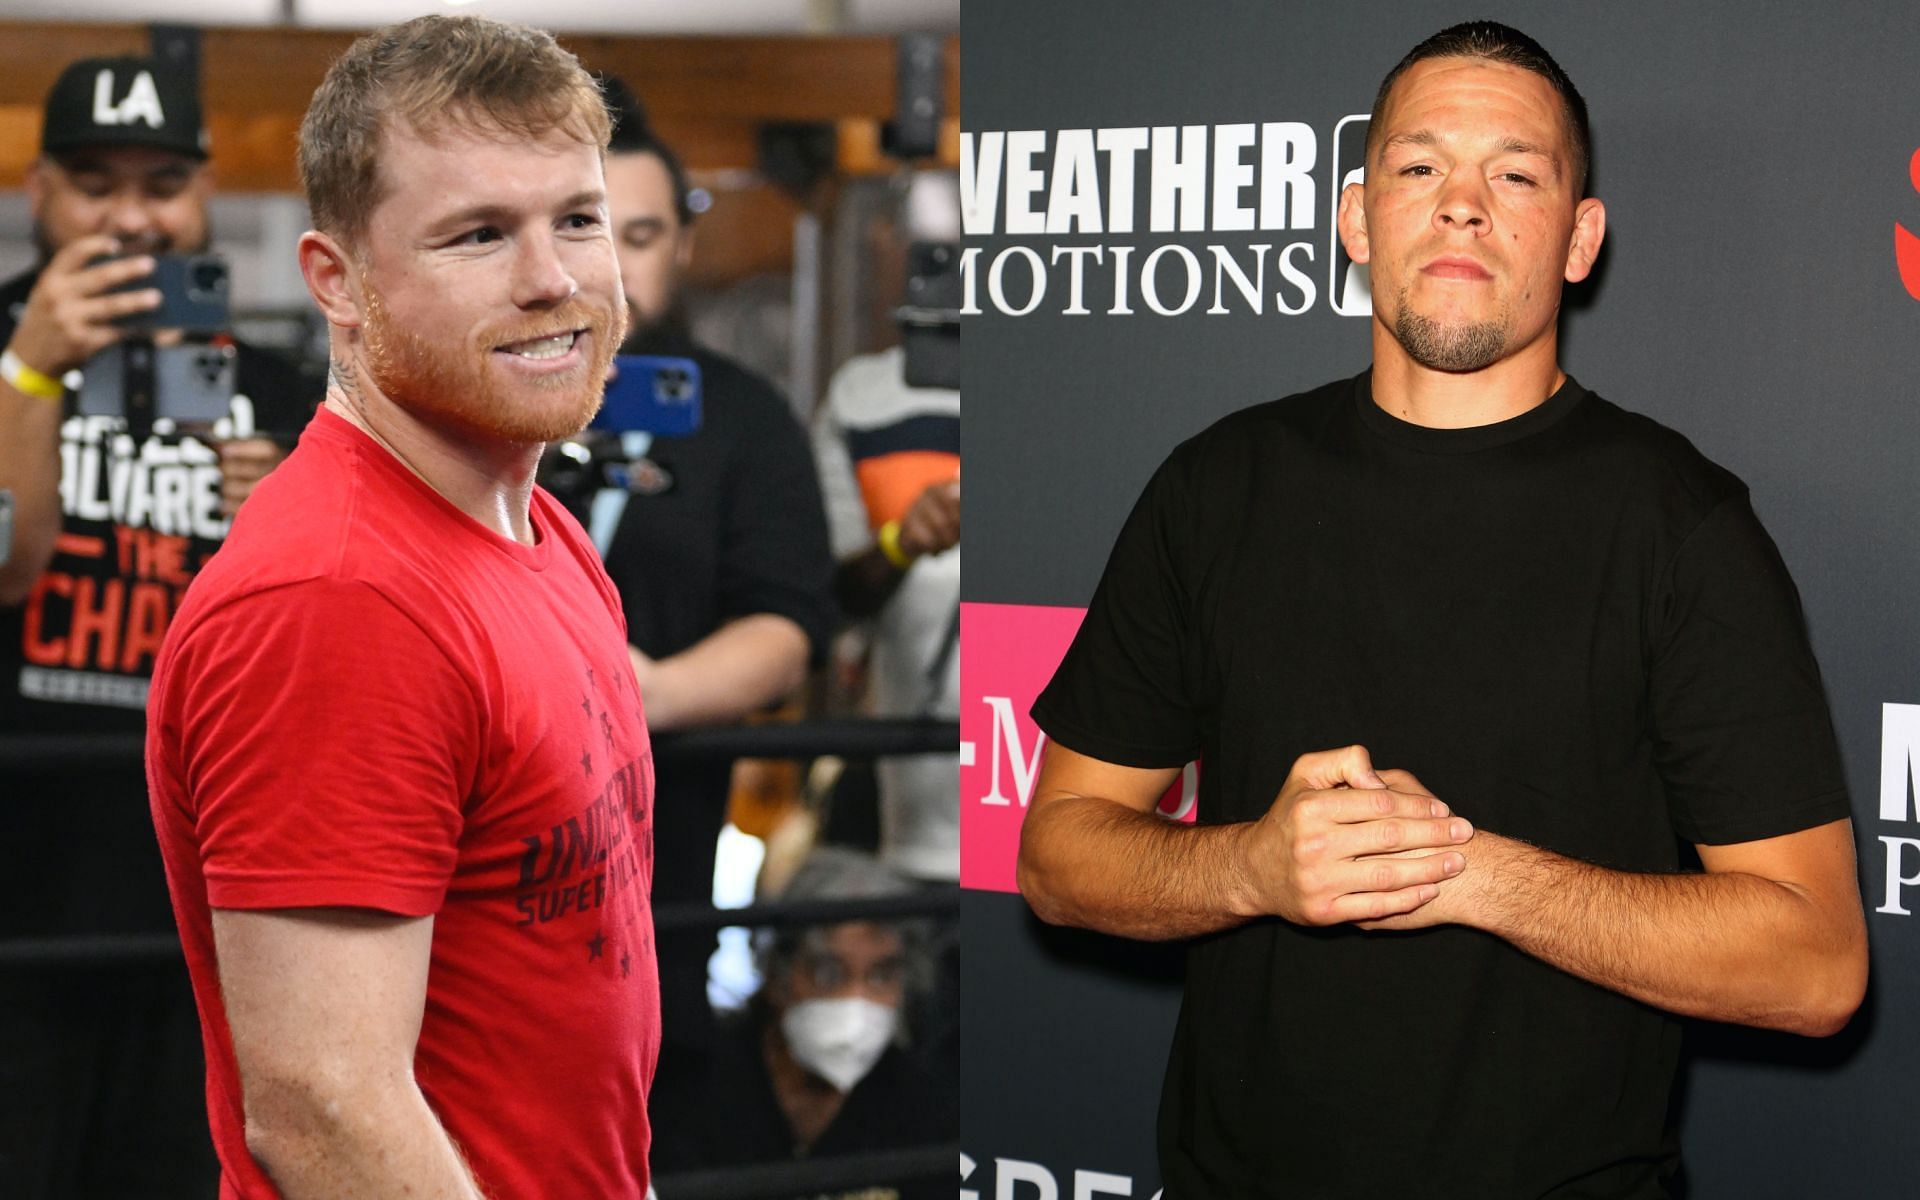 Canelo Alvarez (left) and Nate Diaz (right) [Image Credits: Getty Images]